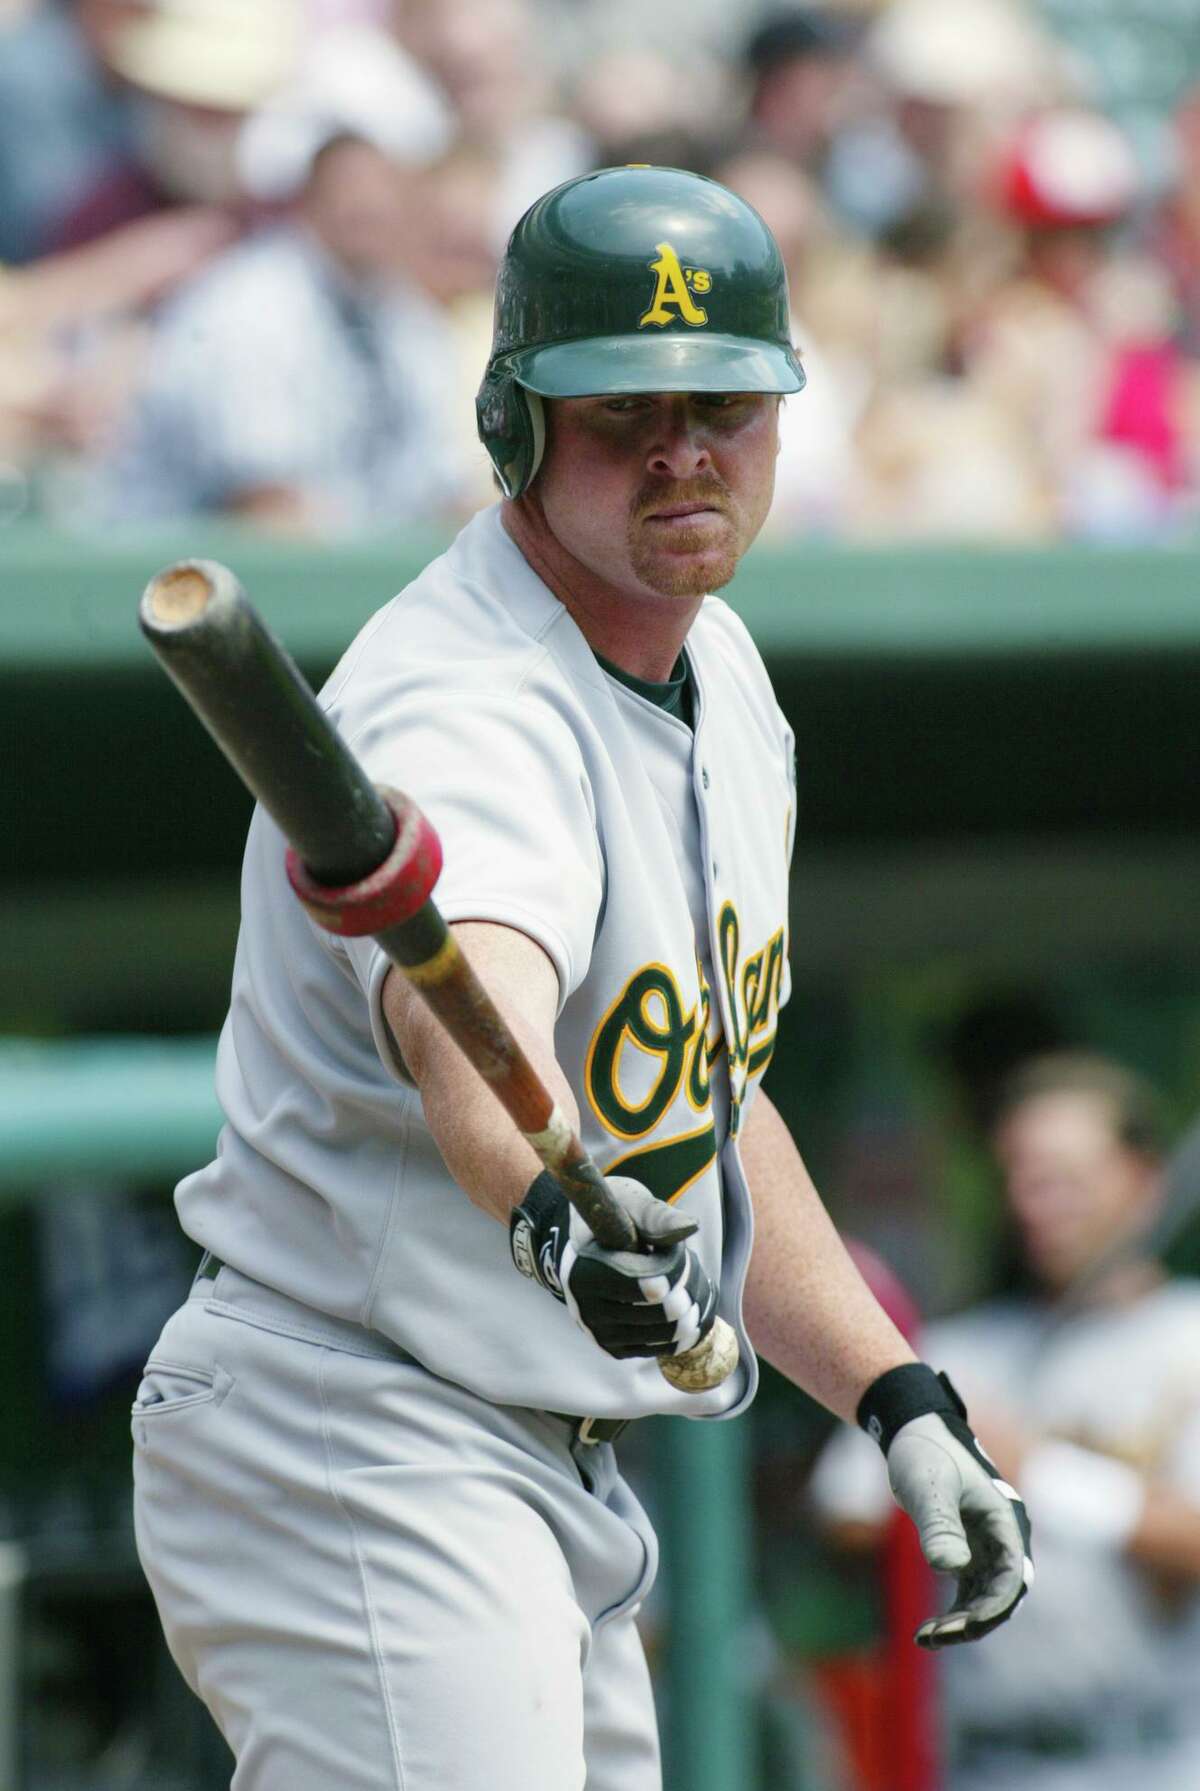 ARLINGTON, TEXAS - APRIL 11: Left fielder Jeremy Giambi #7 of the Oakland Athletics warms up in the on deck circle during the MLB game against the Texas Rangers at The Ballpark in Arlington, Texas on April 11, 2002. The Rangers won 7-0. (Photo by Ronald Martinez/Getty Images)